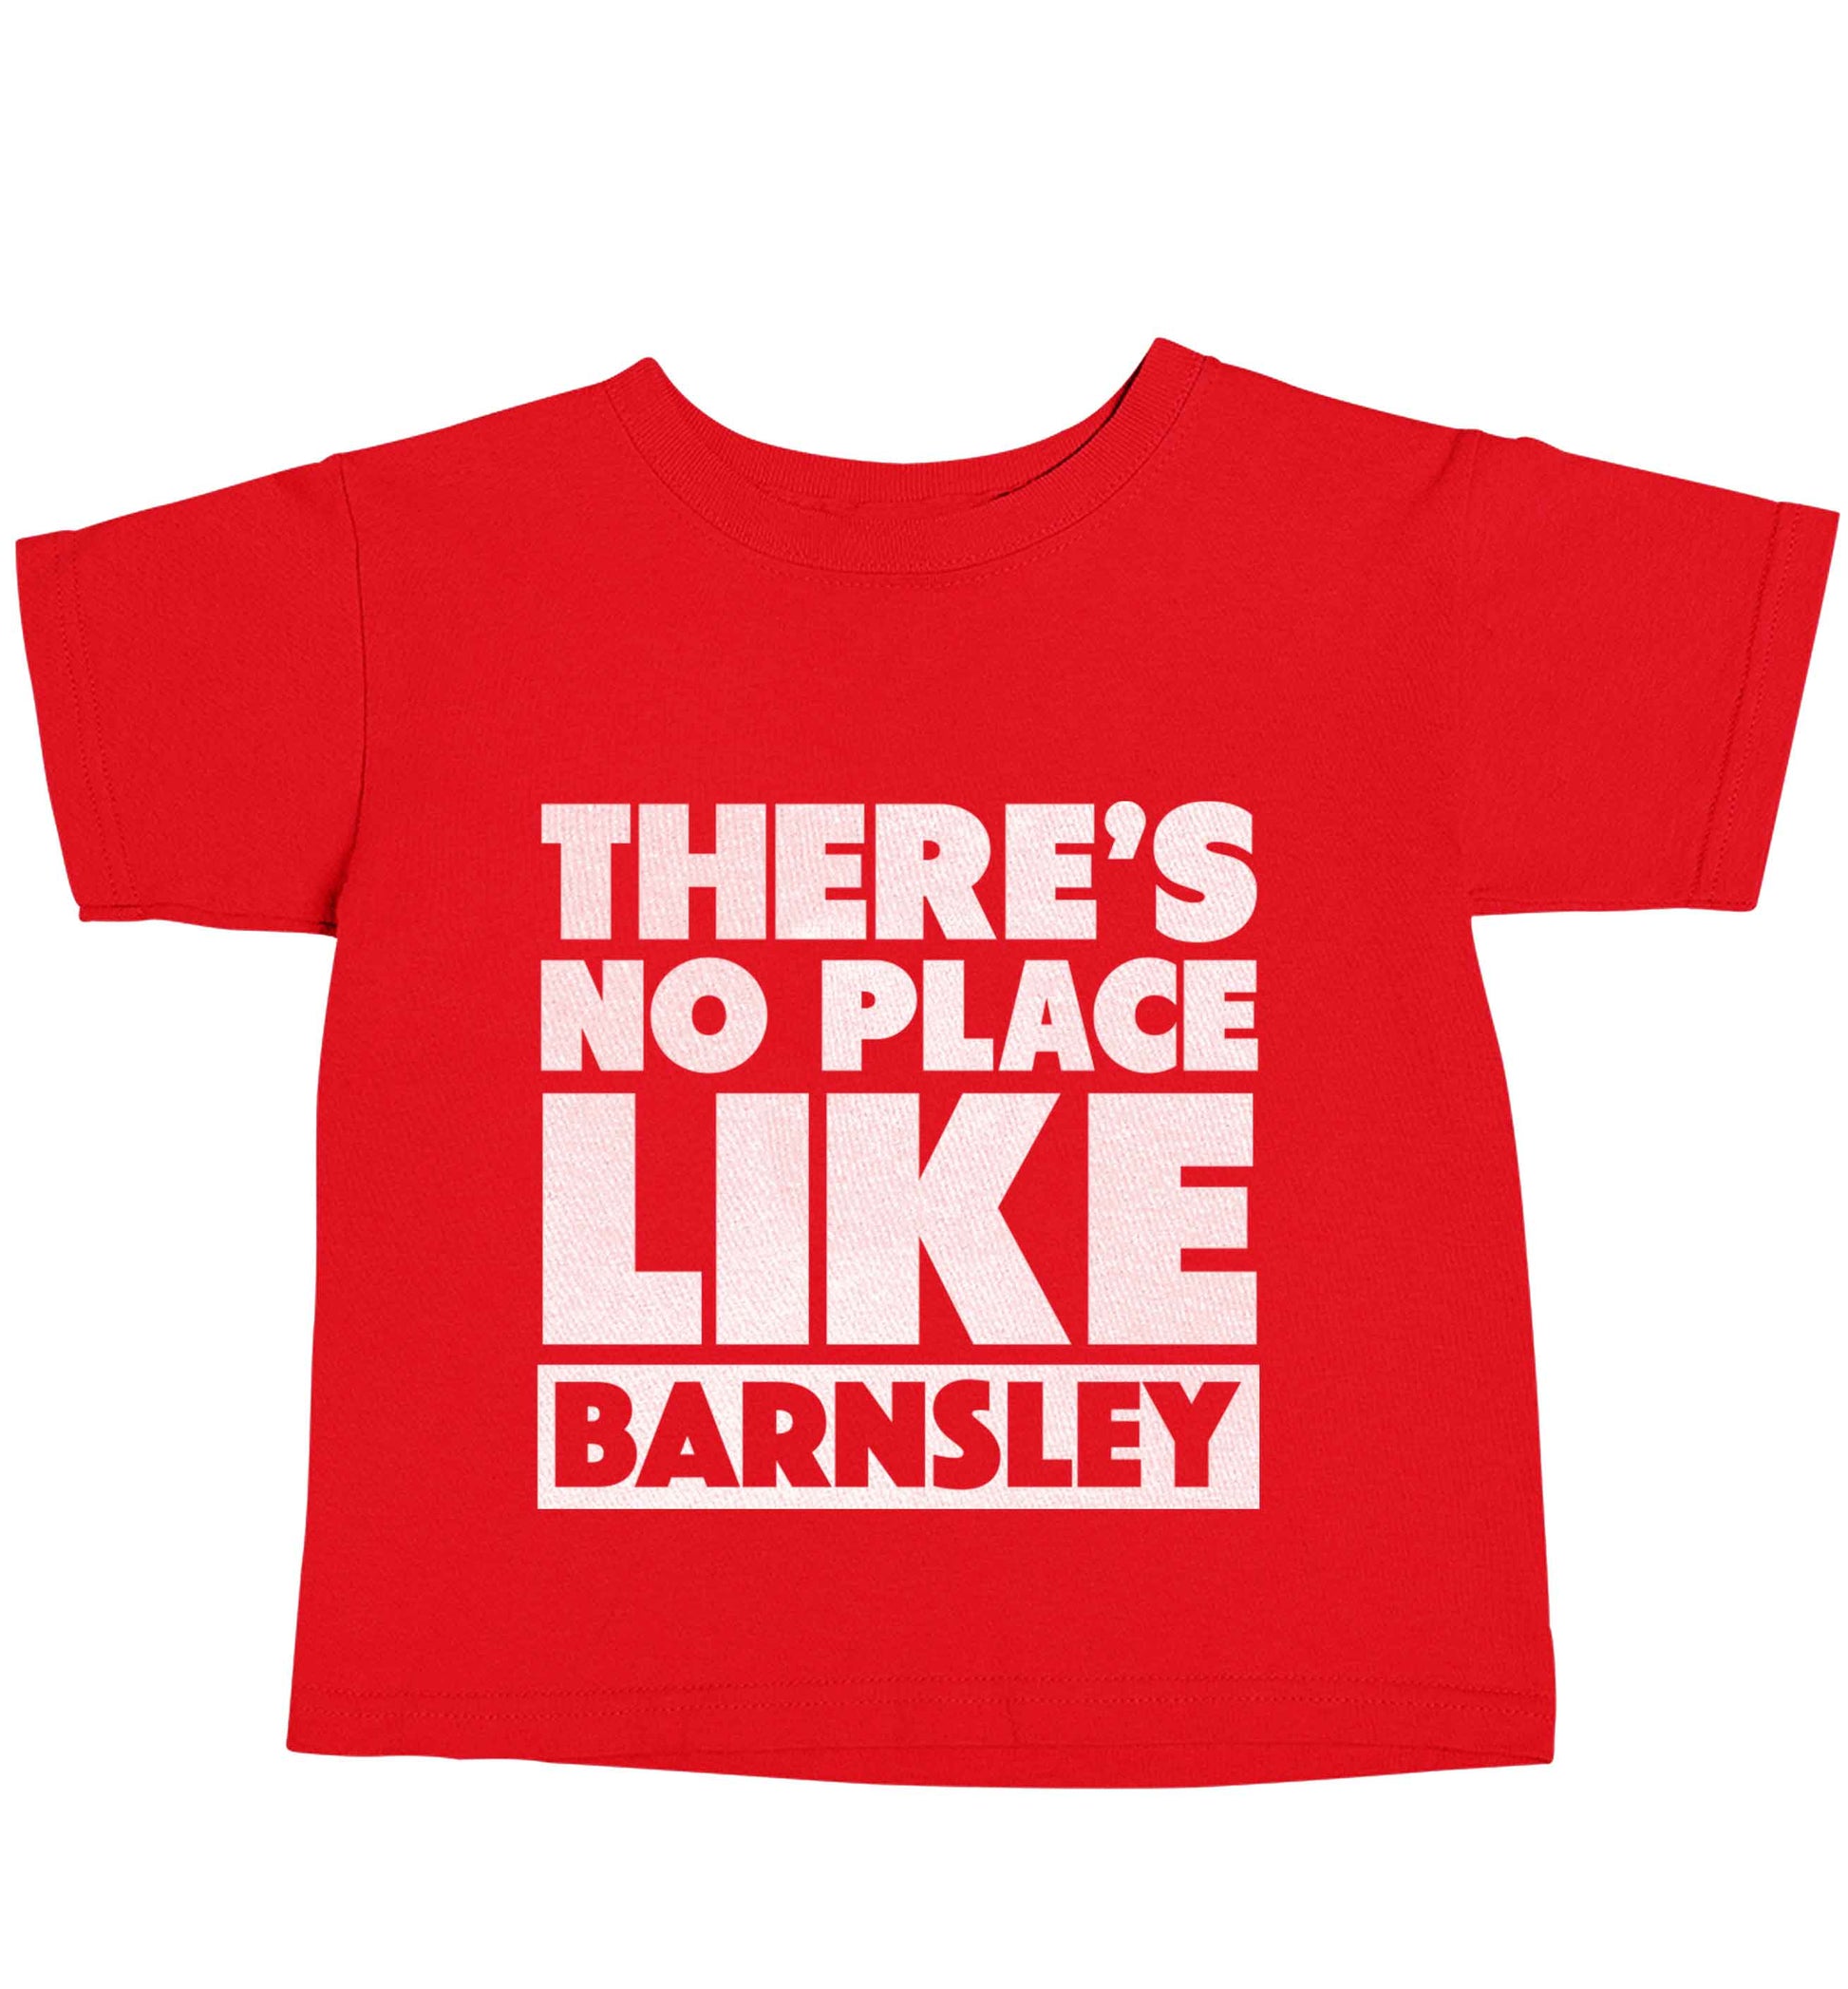 There's No Place Like Barnsley red baby toddler Tshirt 2 Years